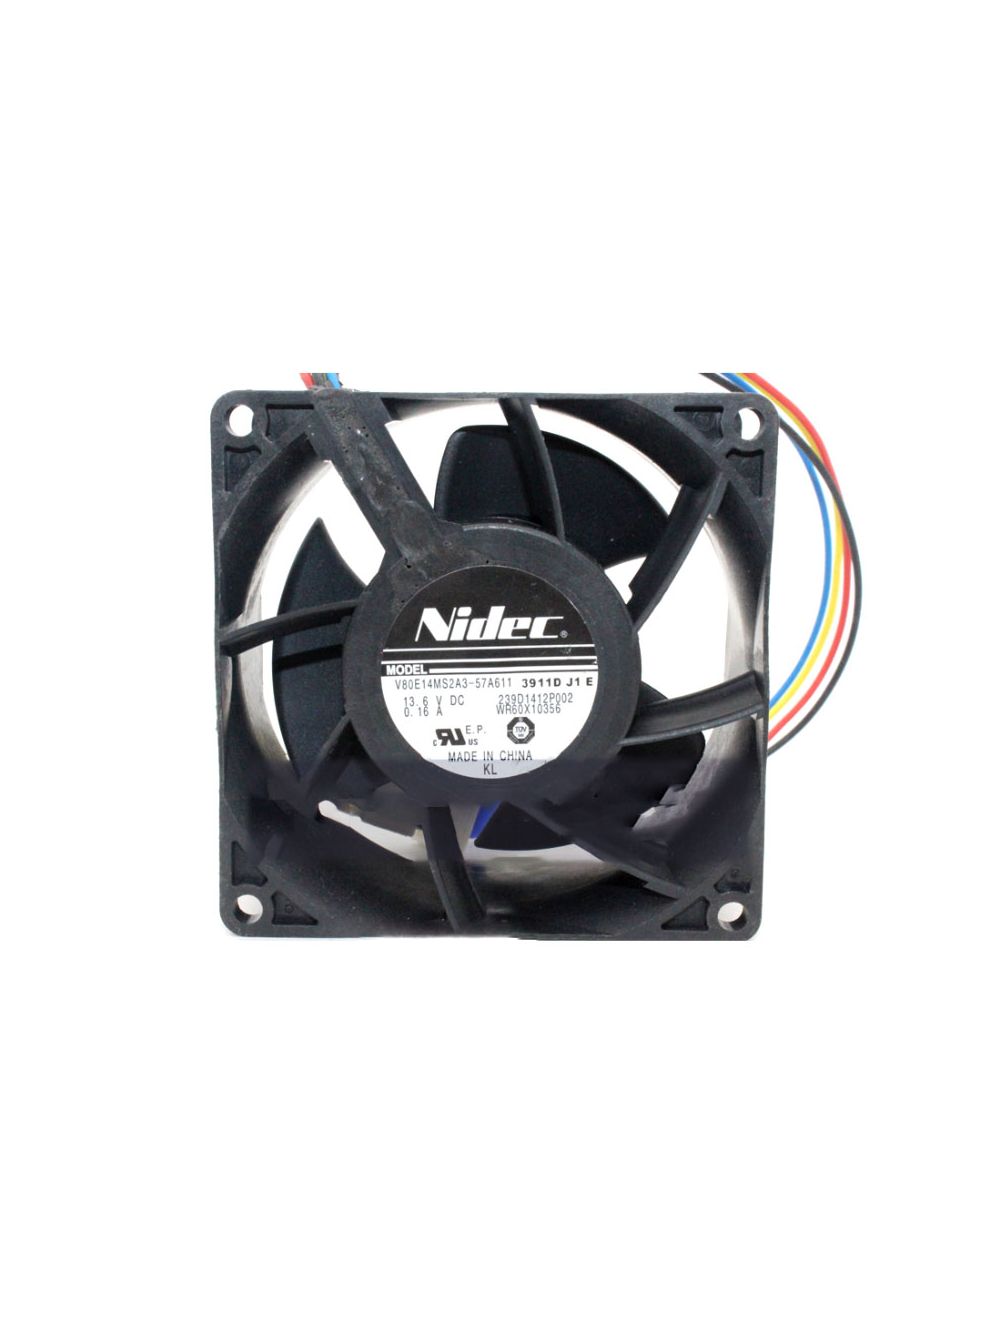 New In stock for sale, Nidec Fan V80E14MS2A3-57A611